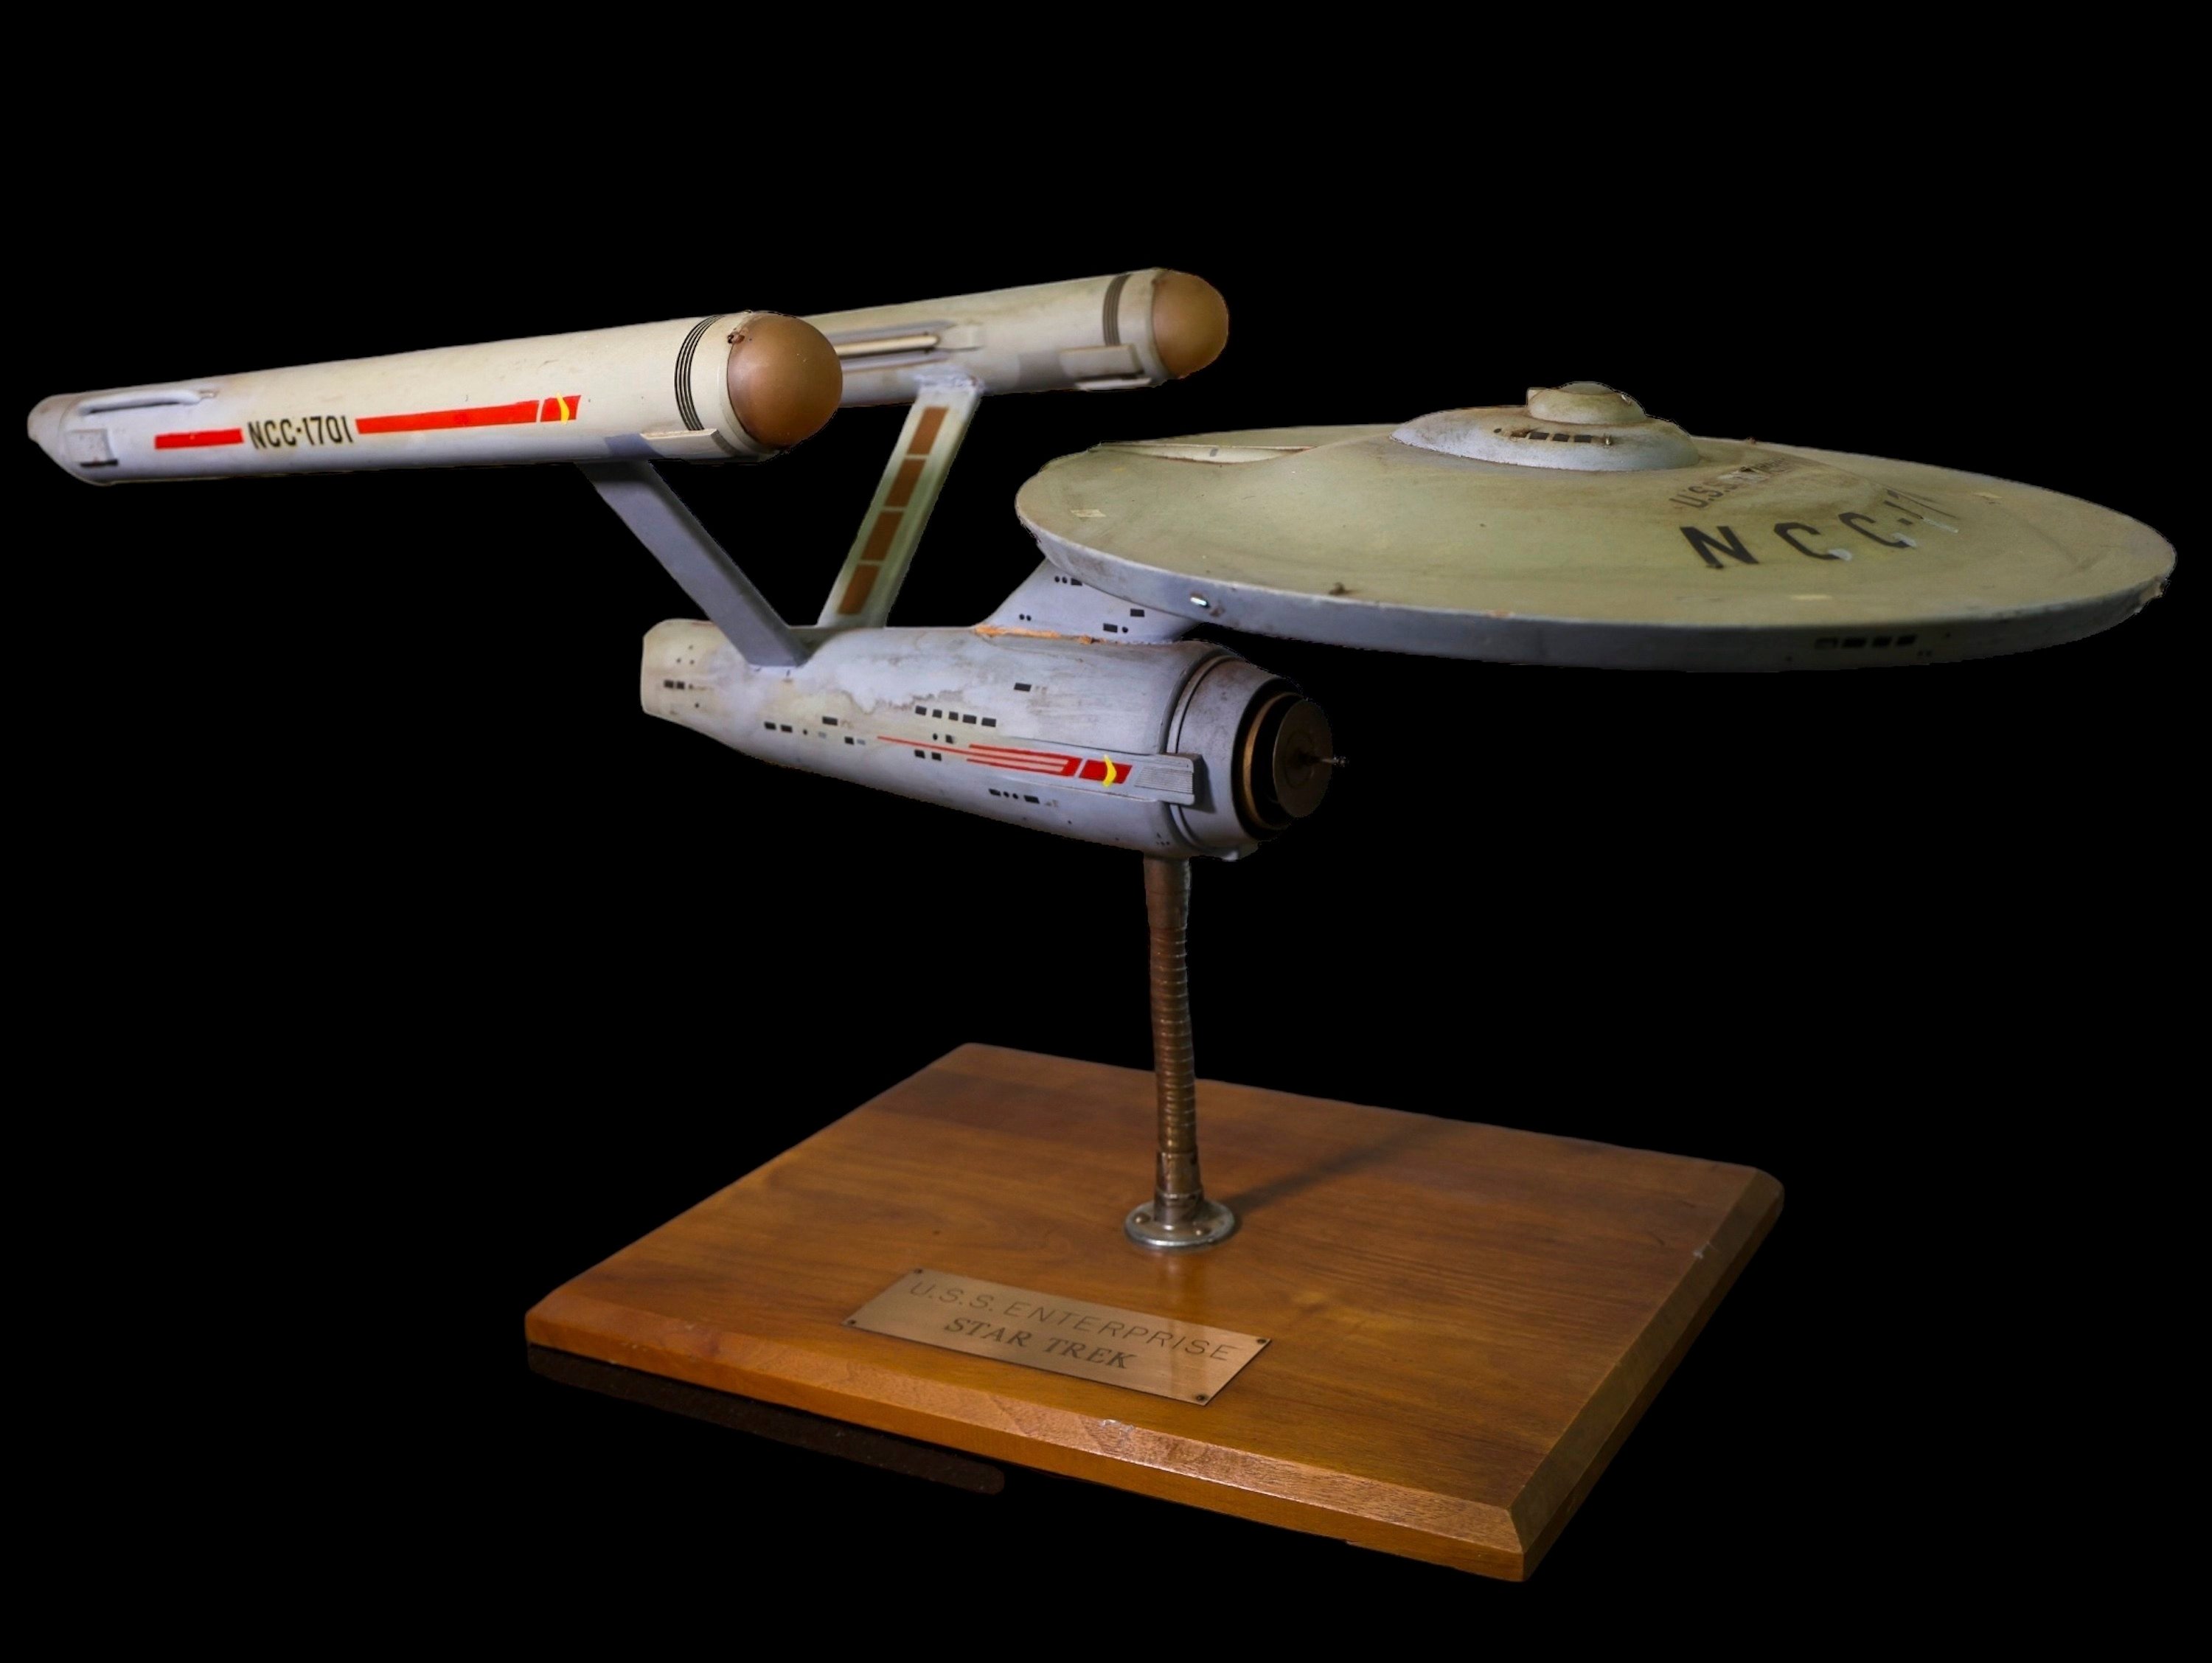 The first model of the USS Enterprise, found in 2023 after going missing in the 1970s. Photo: Heritage Auctions via AP